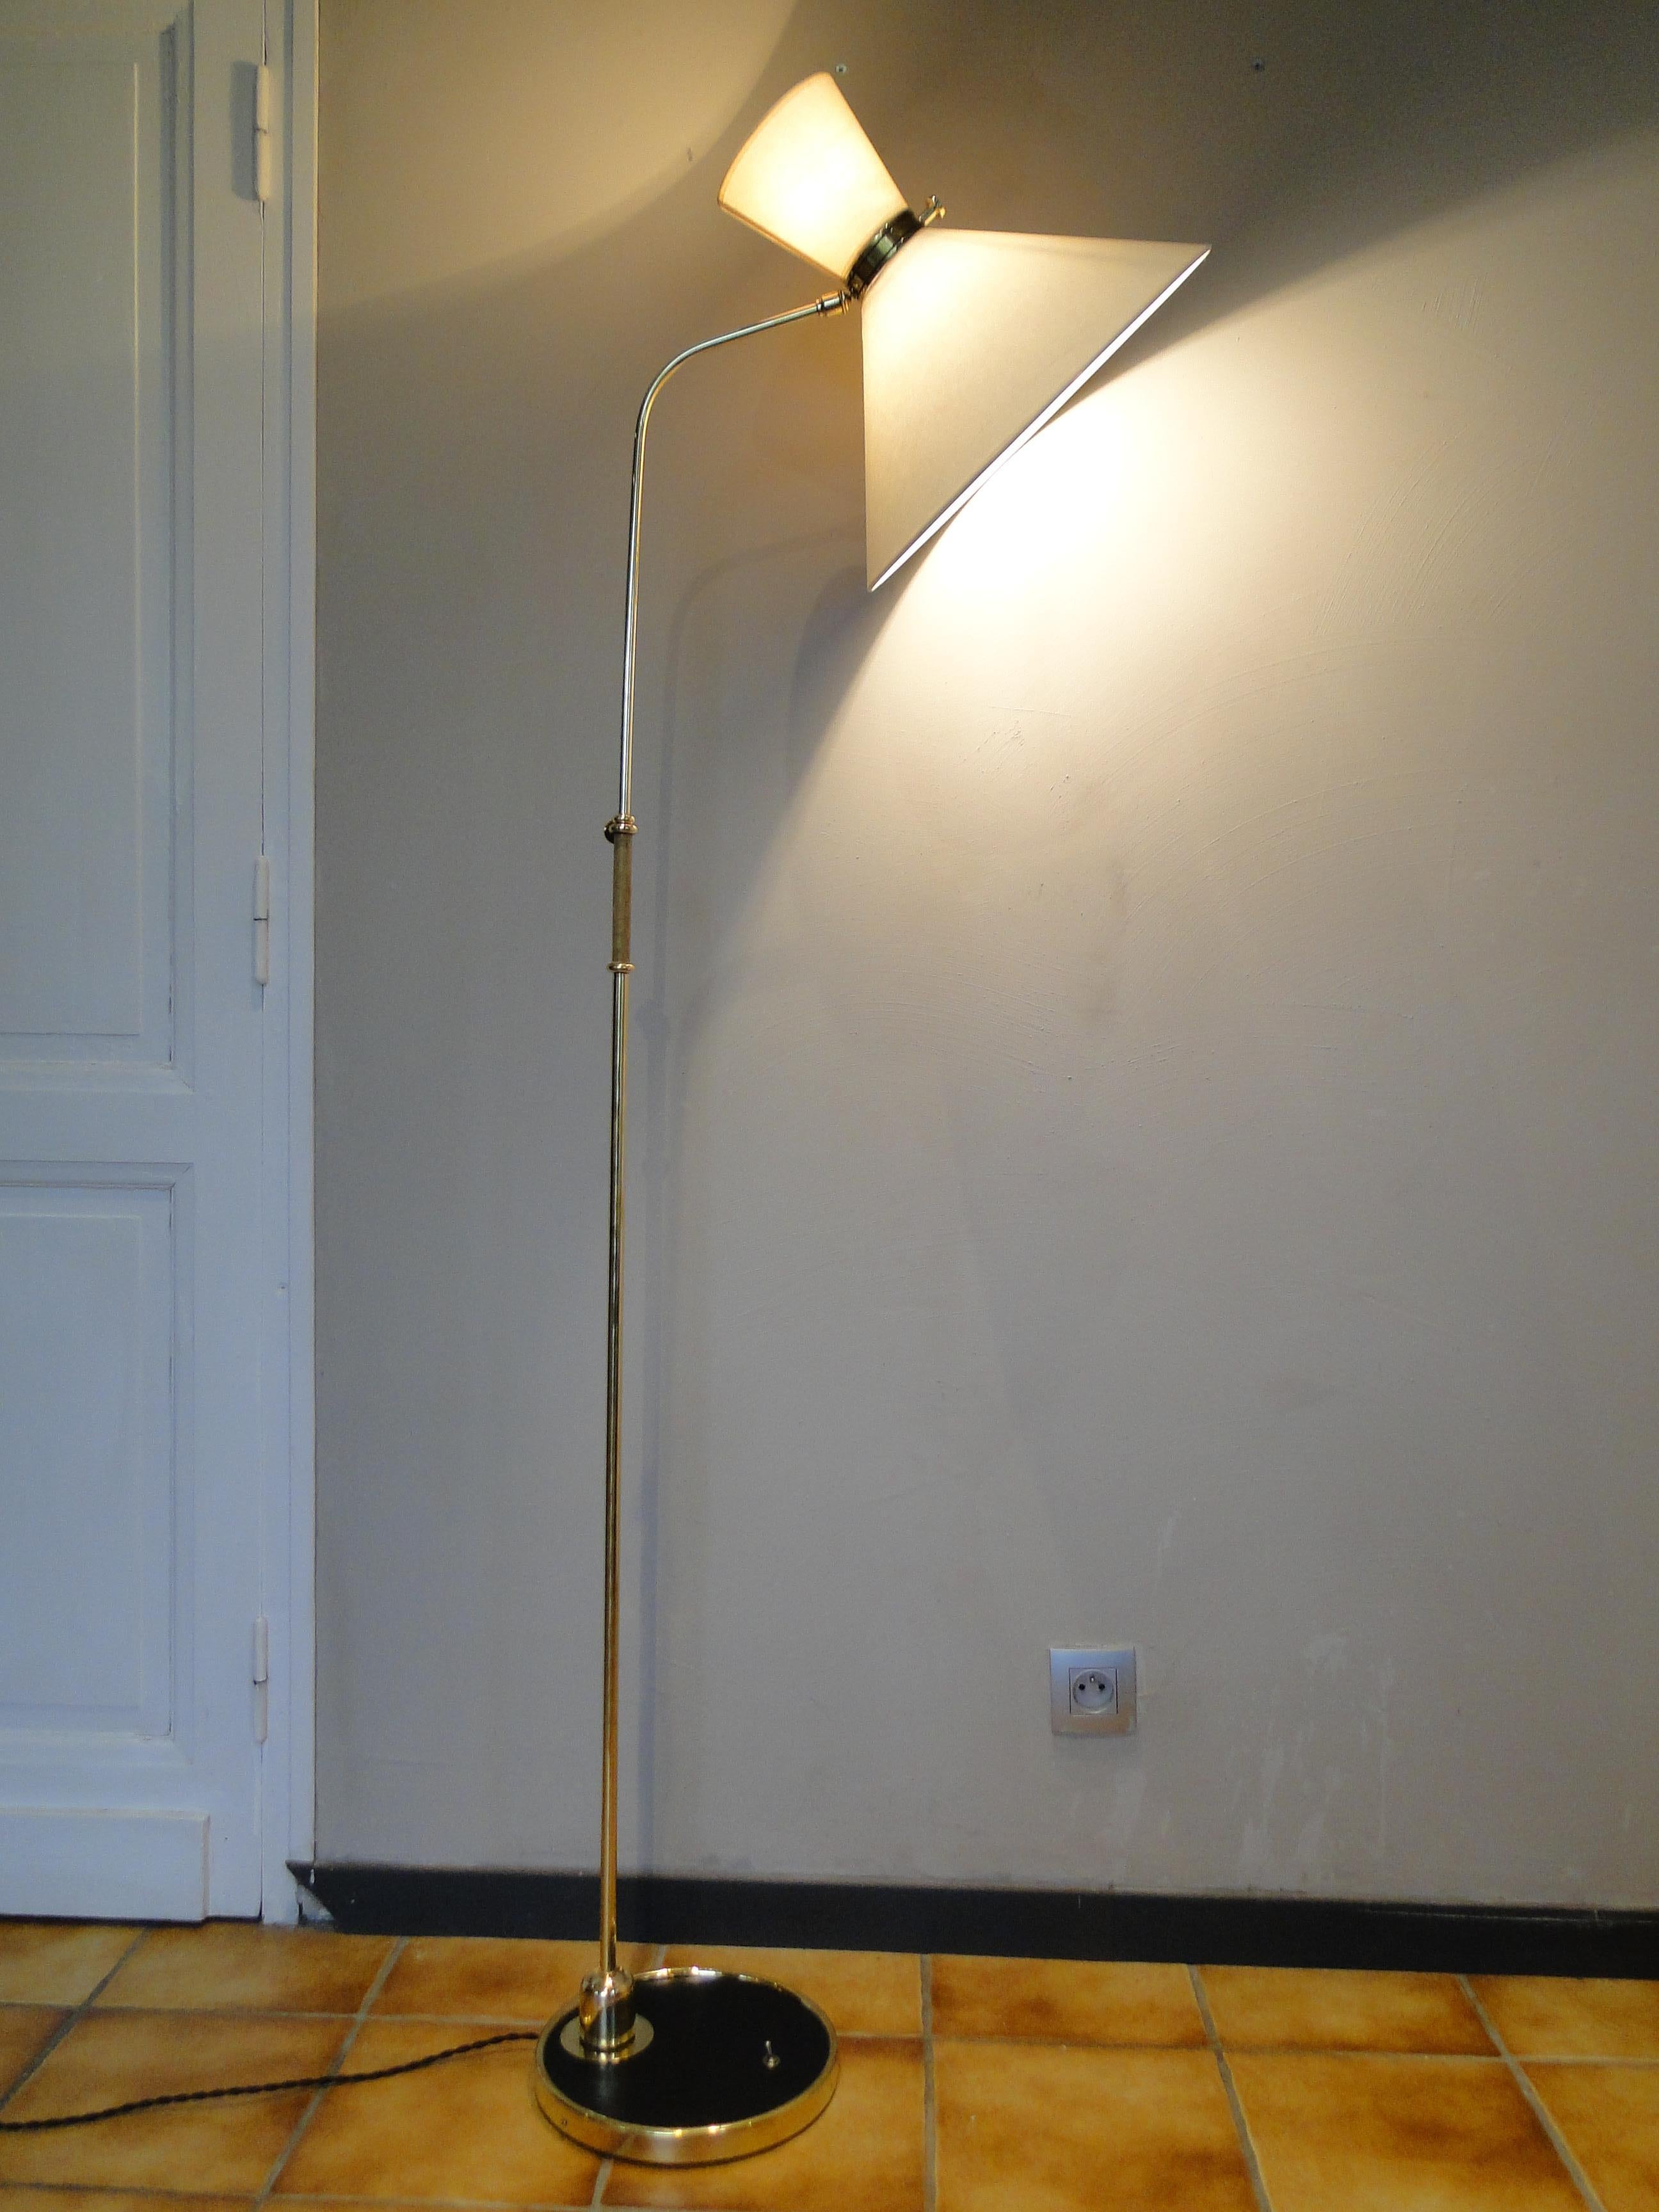 French Maison Lunel articulating floor lamp in brass

 Articulating shade and shaft rotates 360, can achieve very dramatic angles in any direction forward, back, side to side.

 The shaft is mounted to a ball socket which allows full circular